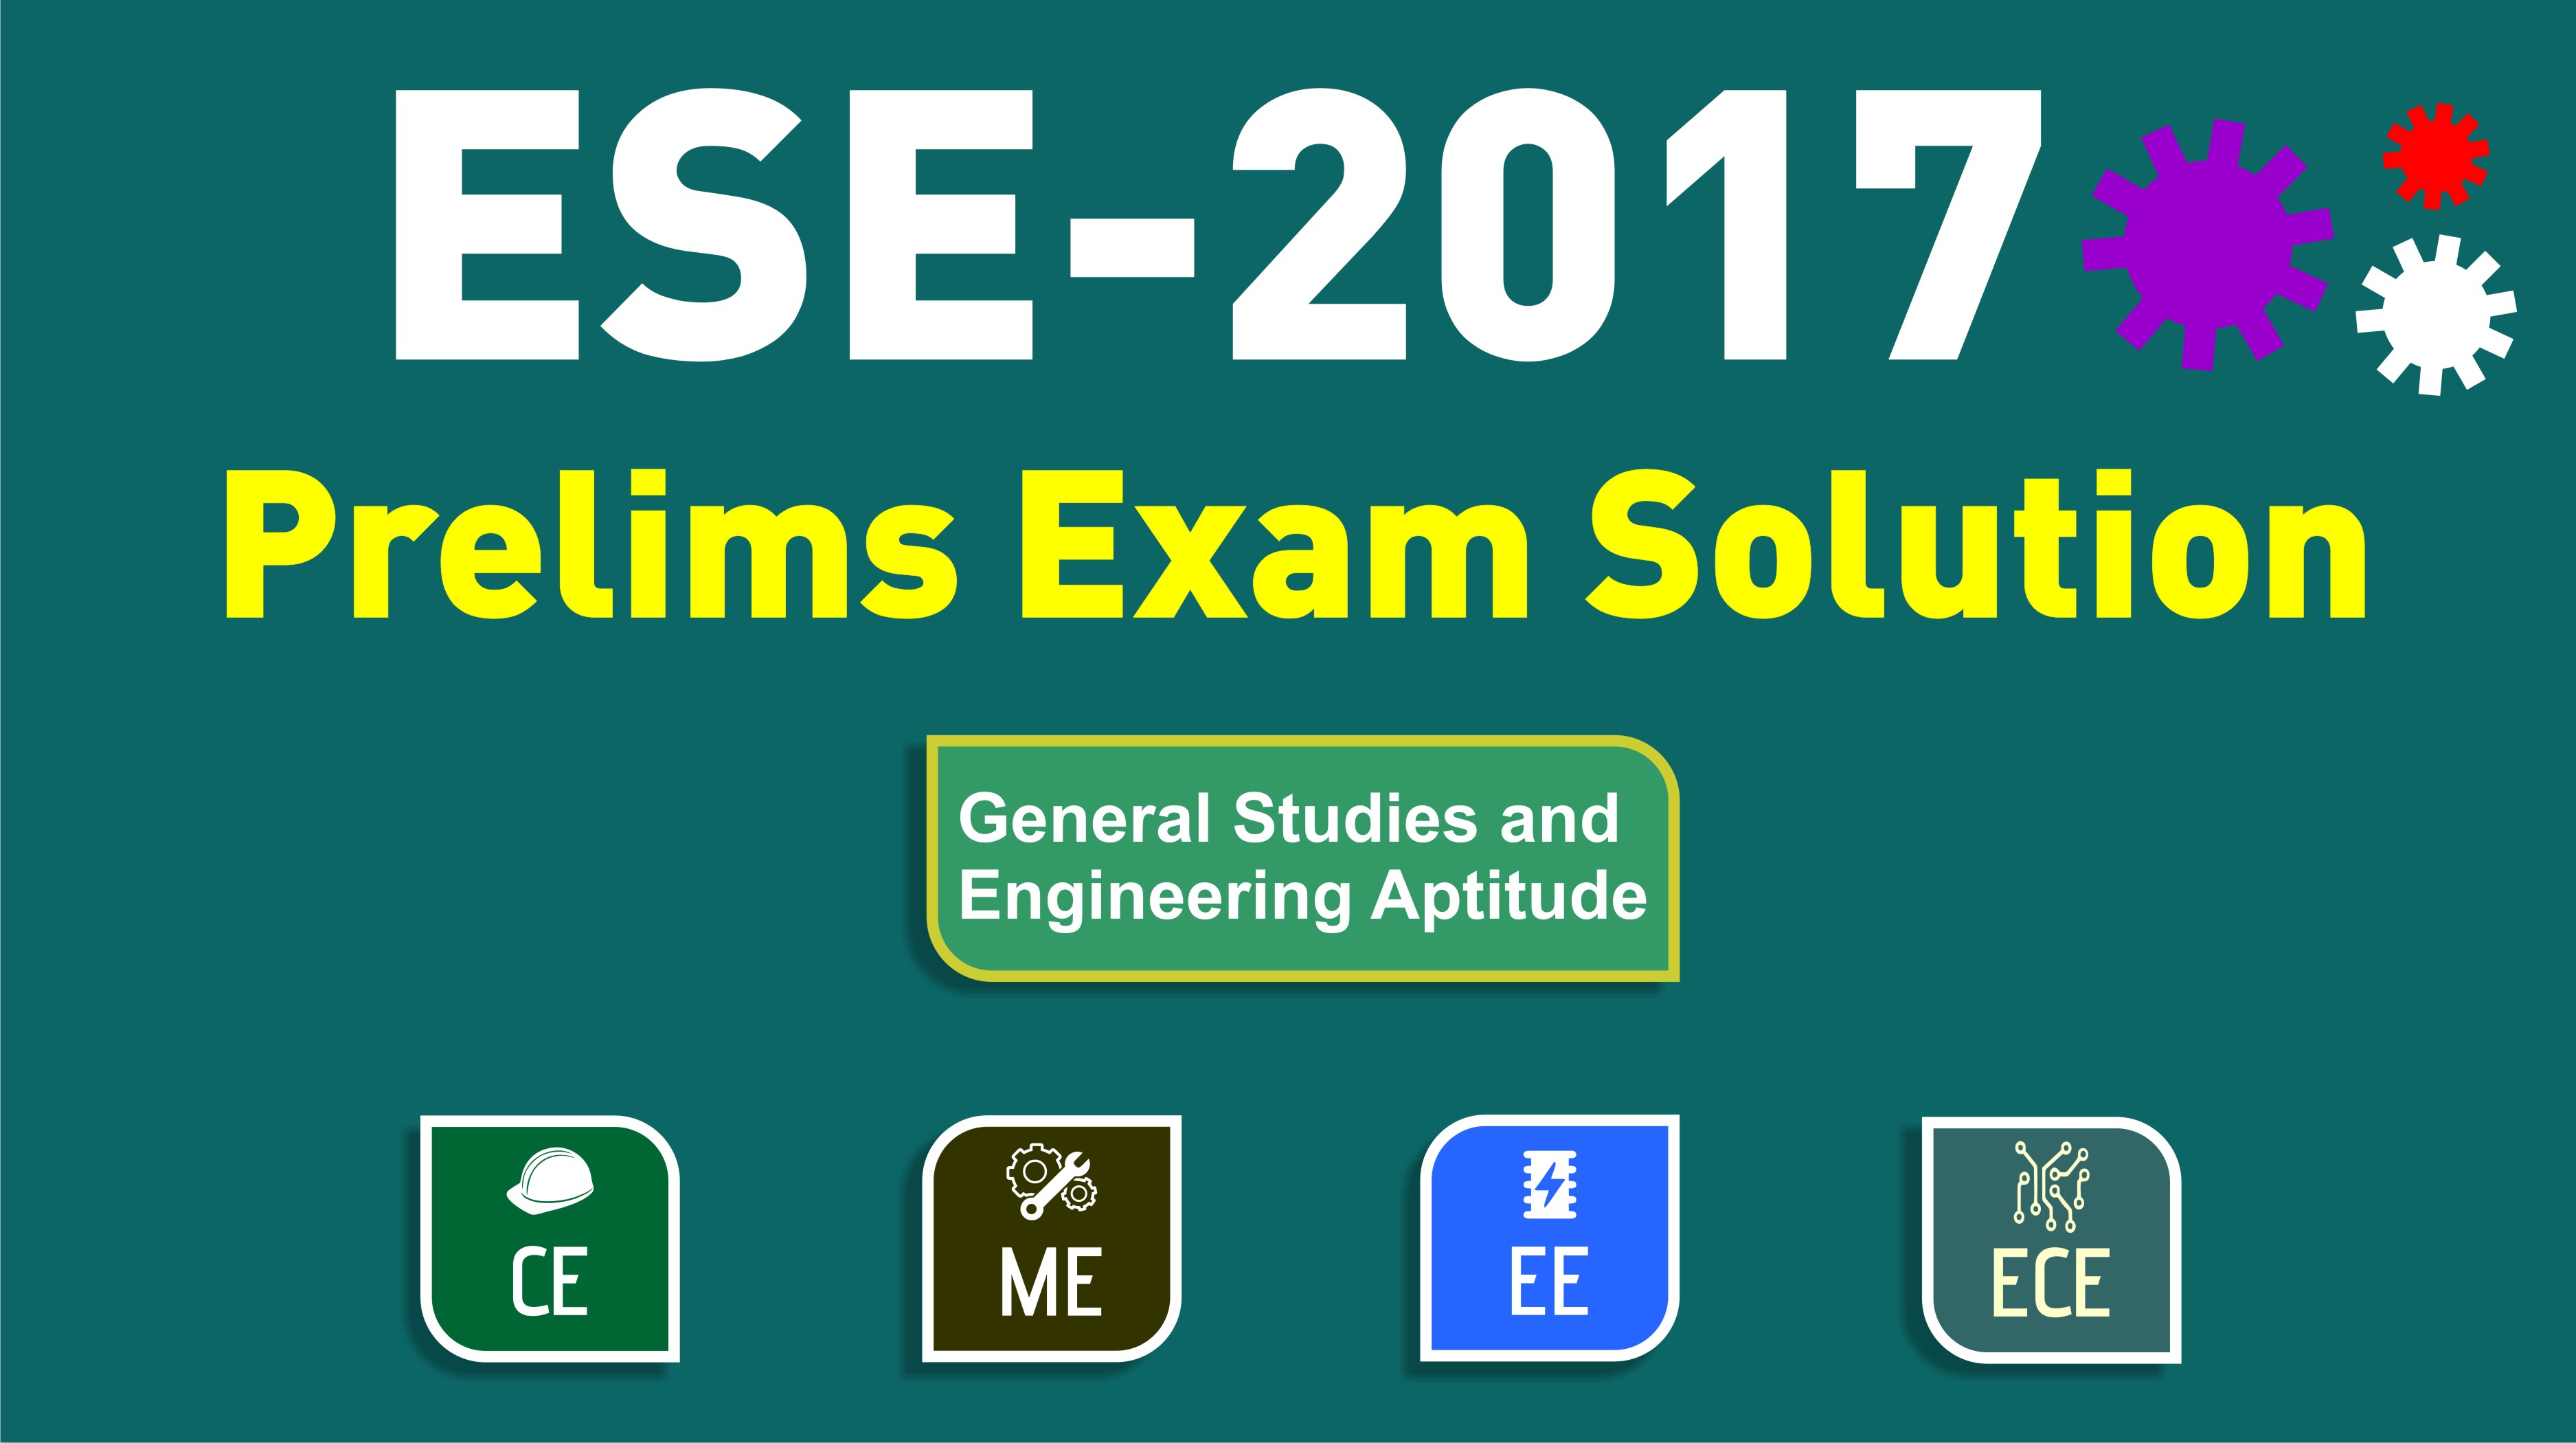 Pceia Exam Question 2017 : Sample/practice exam 2017, questions and